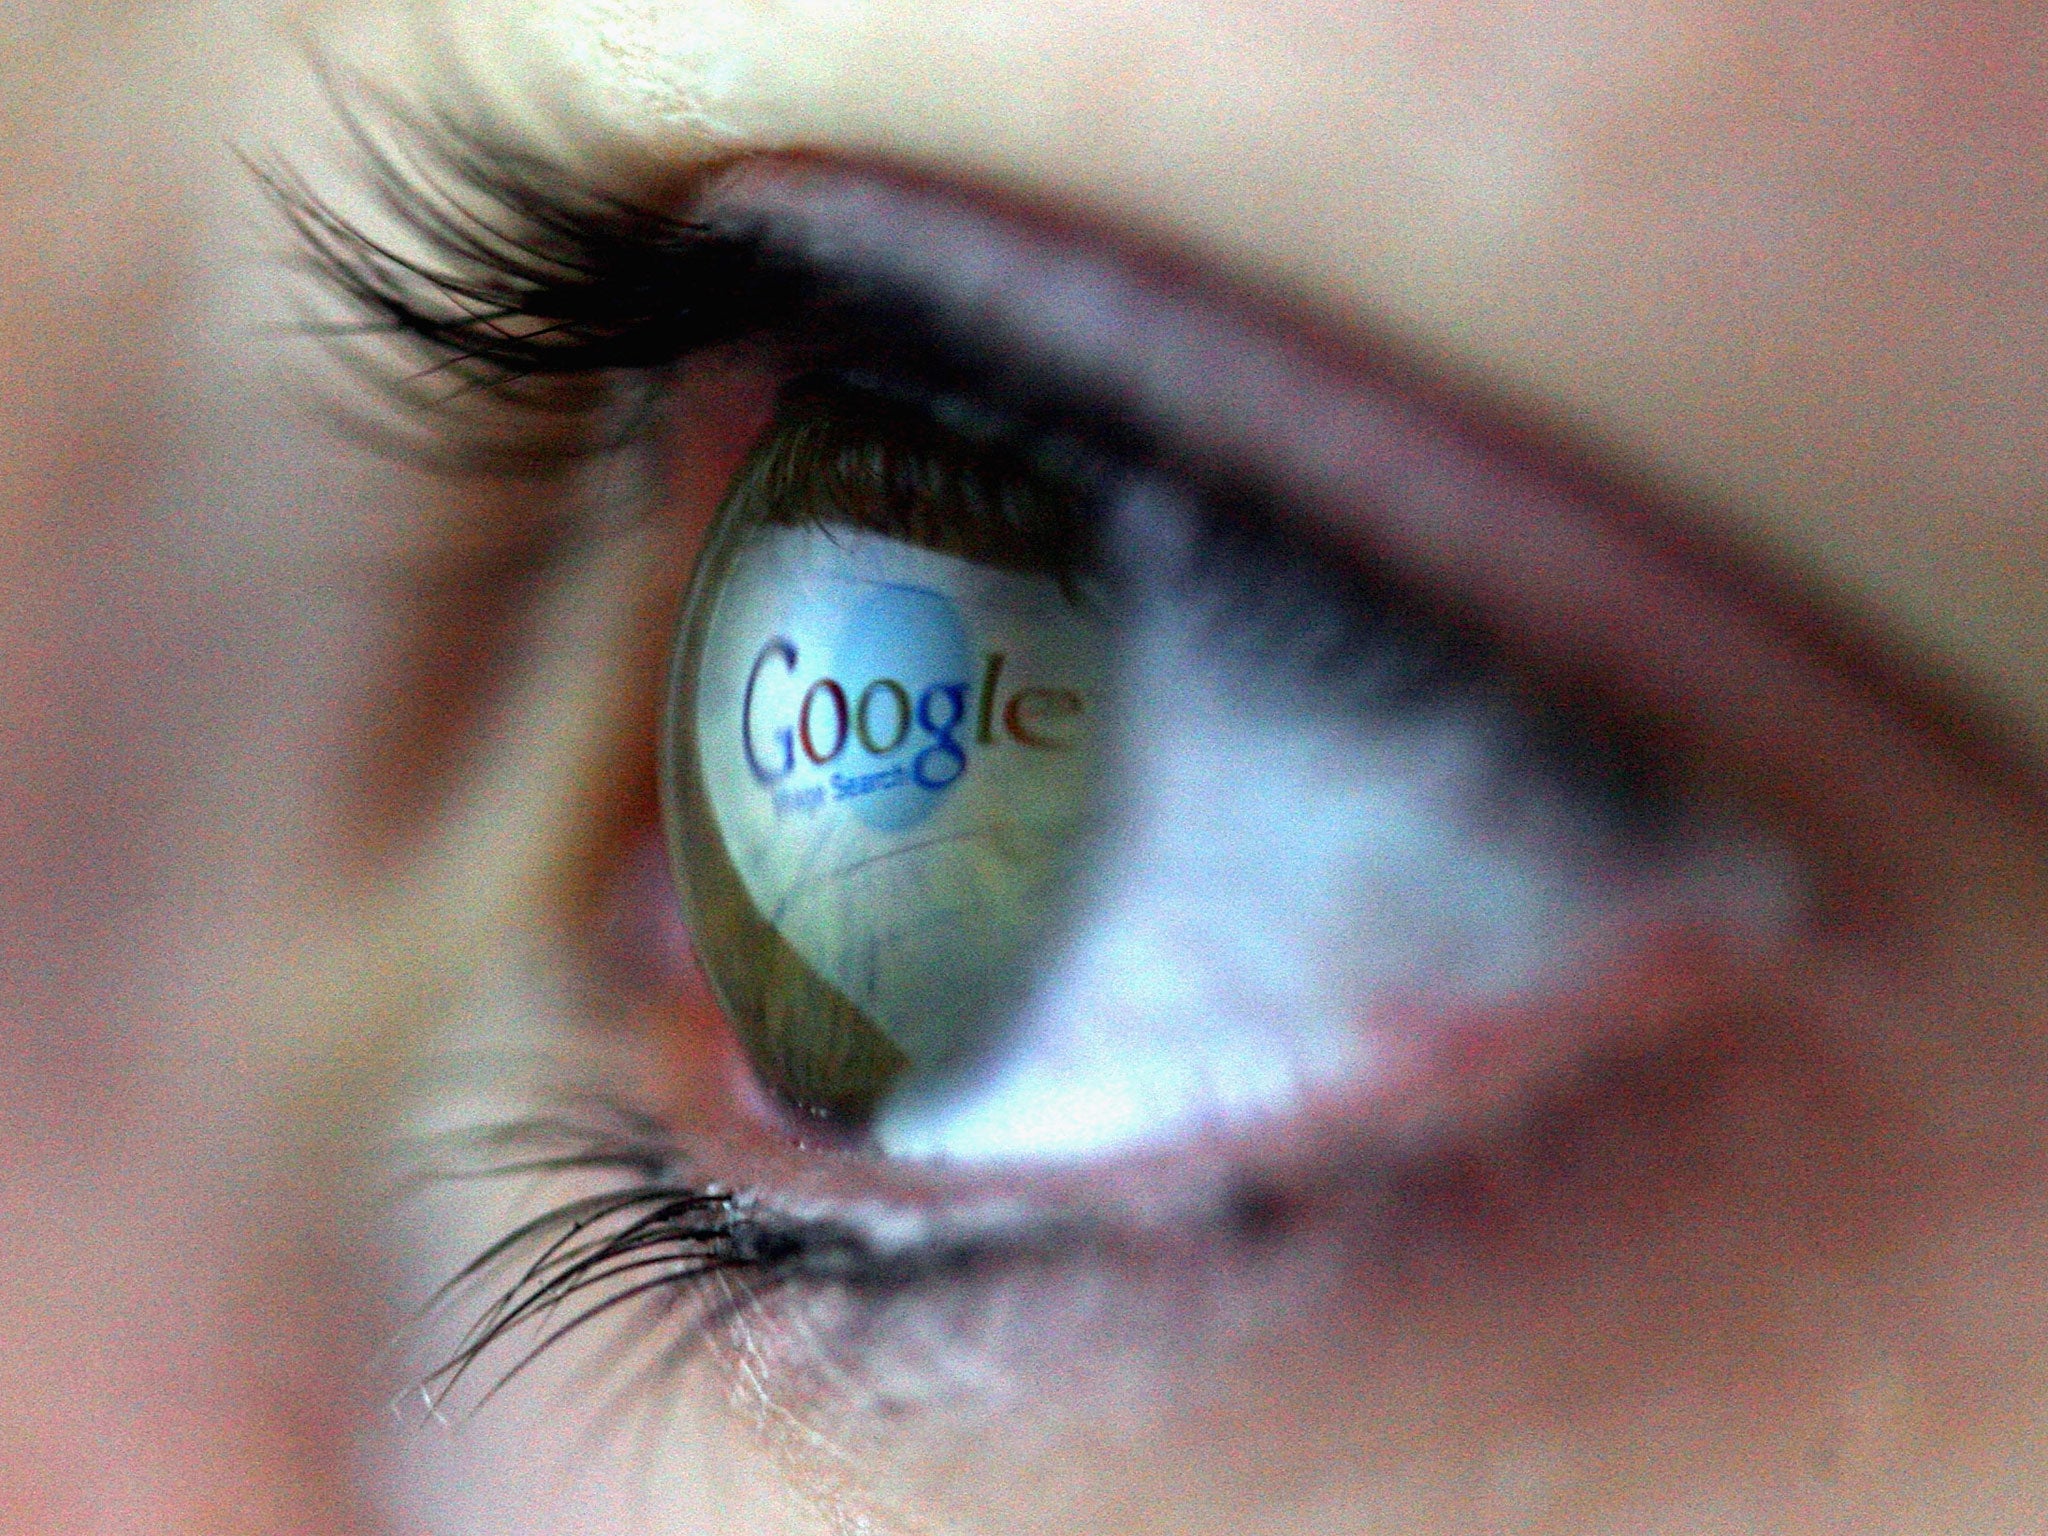 The investigation started in November 2010 after three companies complained about Google’s business practices in Europe